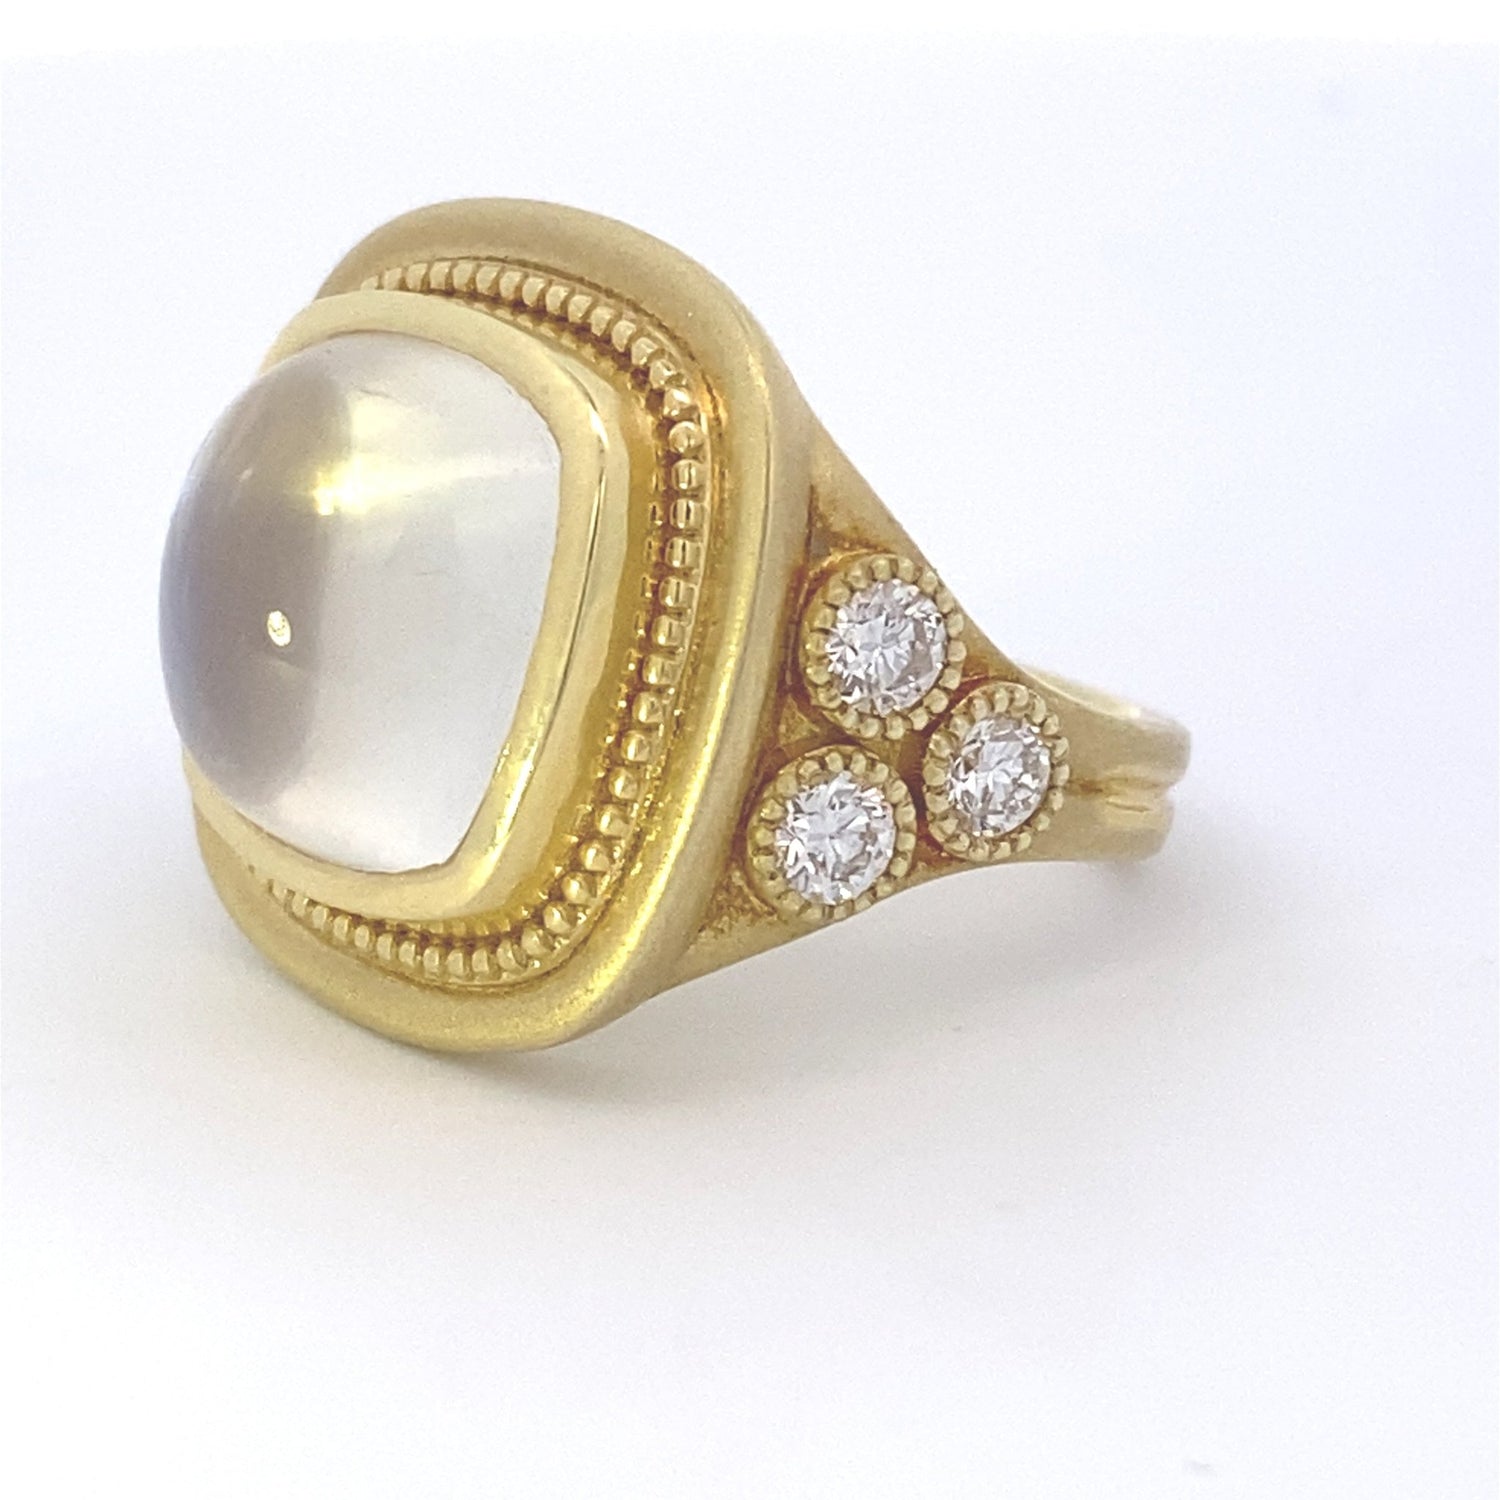 Ring- 14kyg Cabochon Moonstone w/.60ctw diamond accents - Gaines Jewelers